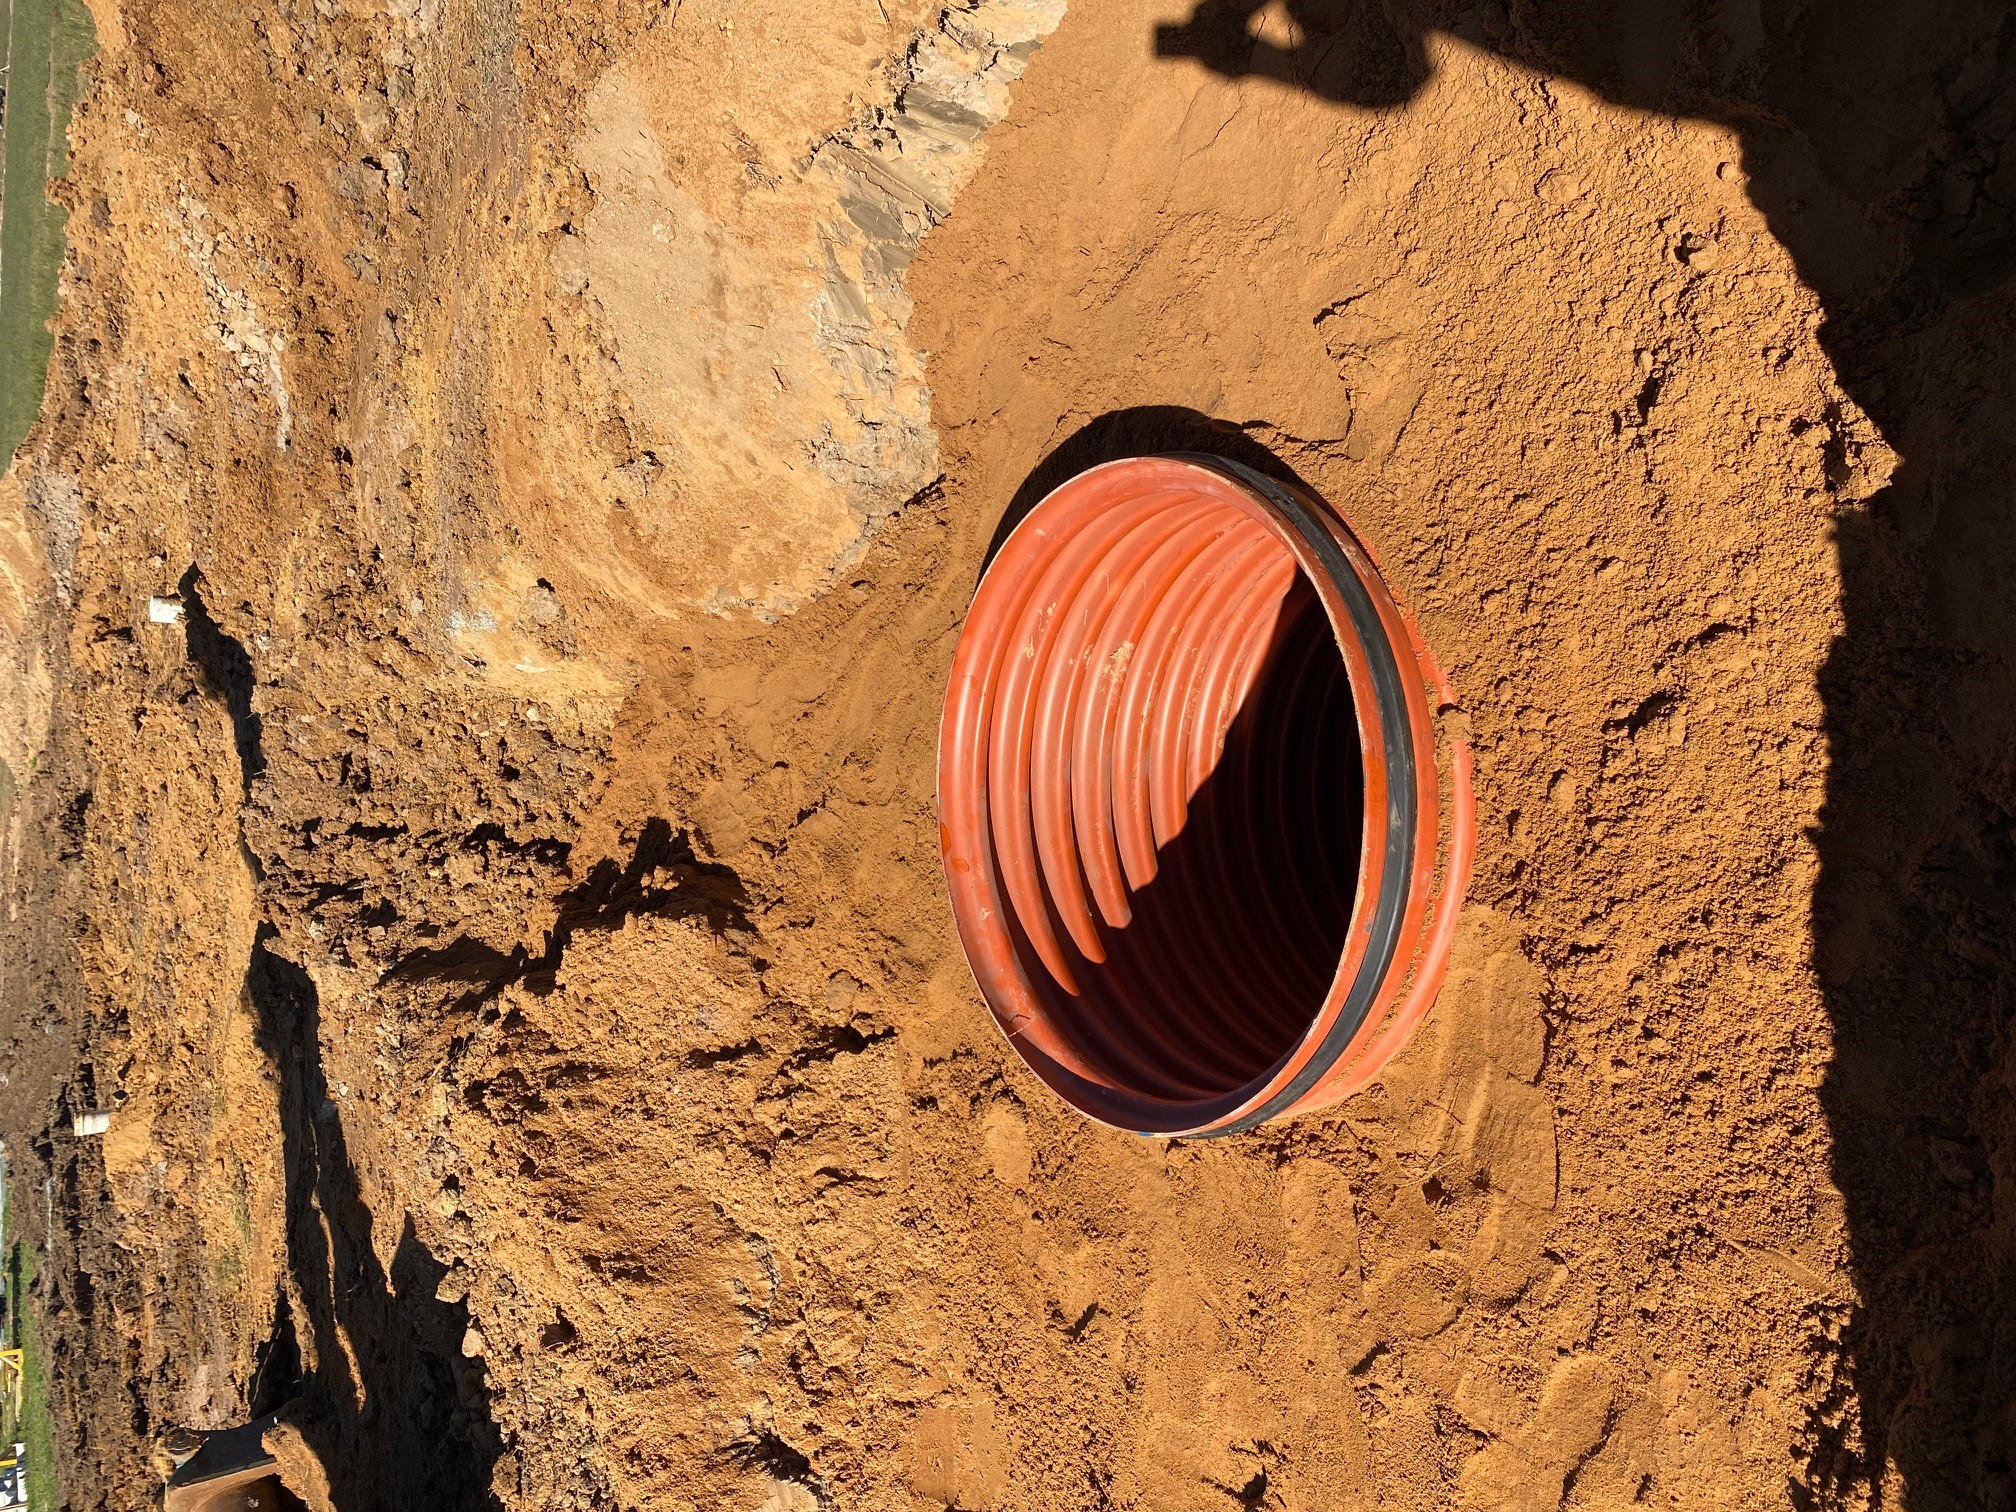 The EZIpit maintenance structures streamline laying and maintaining sewer pipe systems.